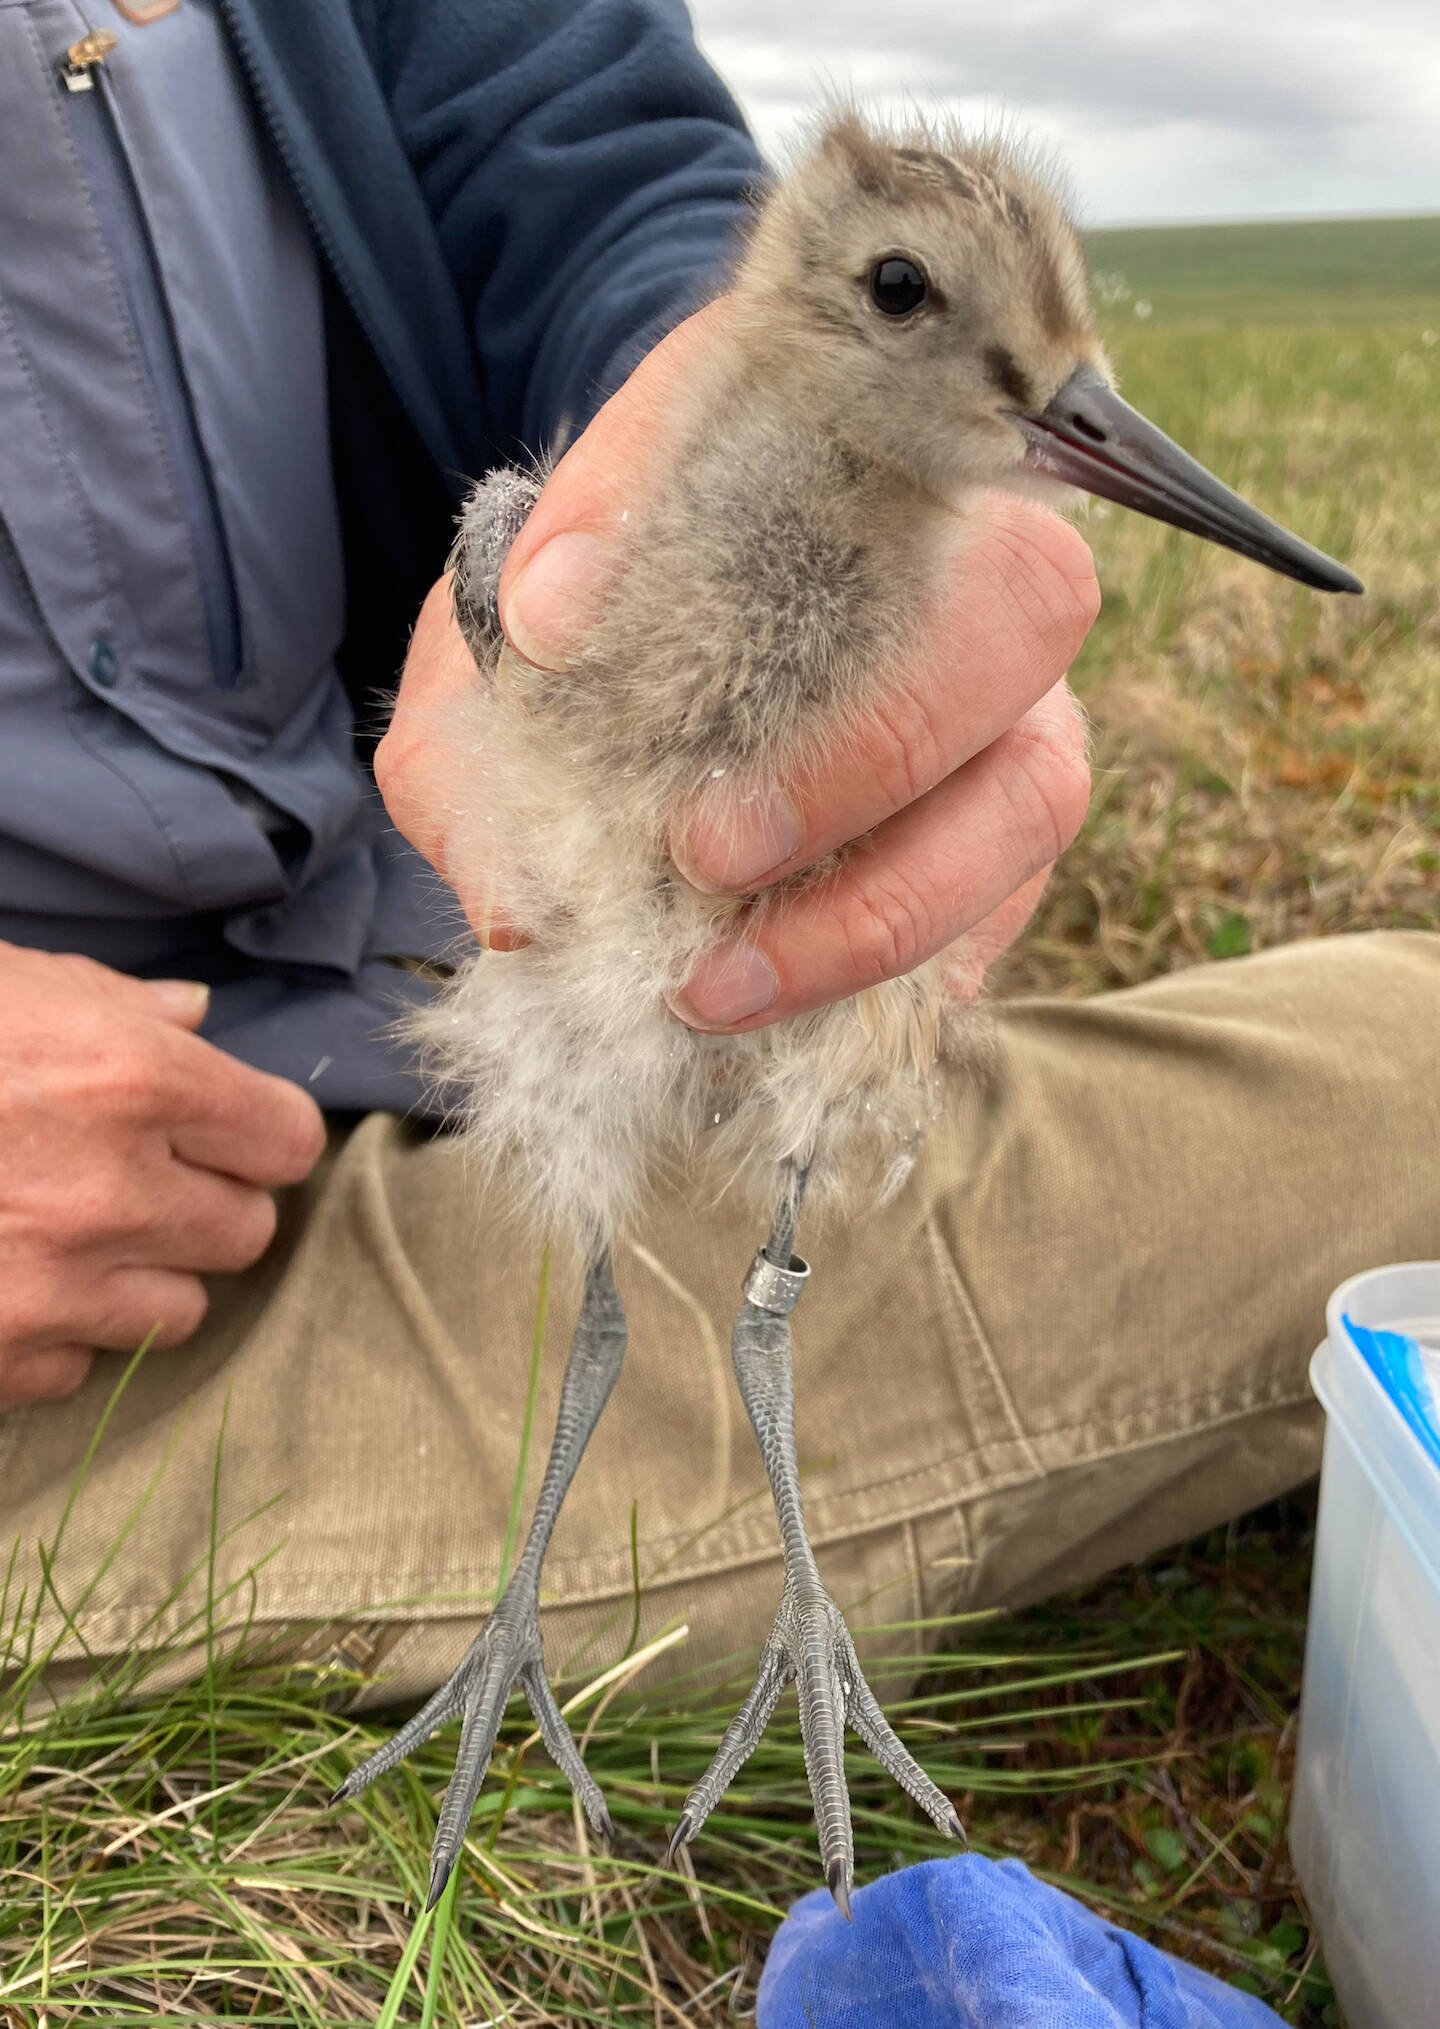 Scientist Jesse Conklin holds a bar-tailed godwit chick not far from Nome. This was about a month before the bird embarked on an 8,425-mile nonstop flight to Tasmania that took 11 days without rest. (Courtesy Photo / Dan Ruthrauff)